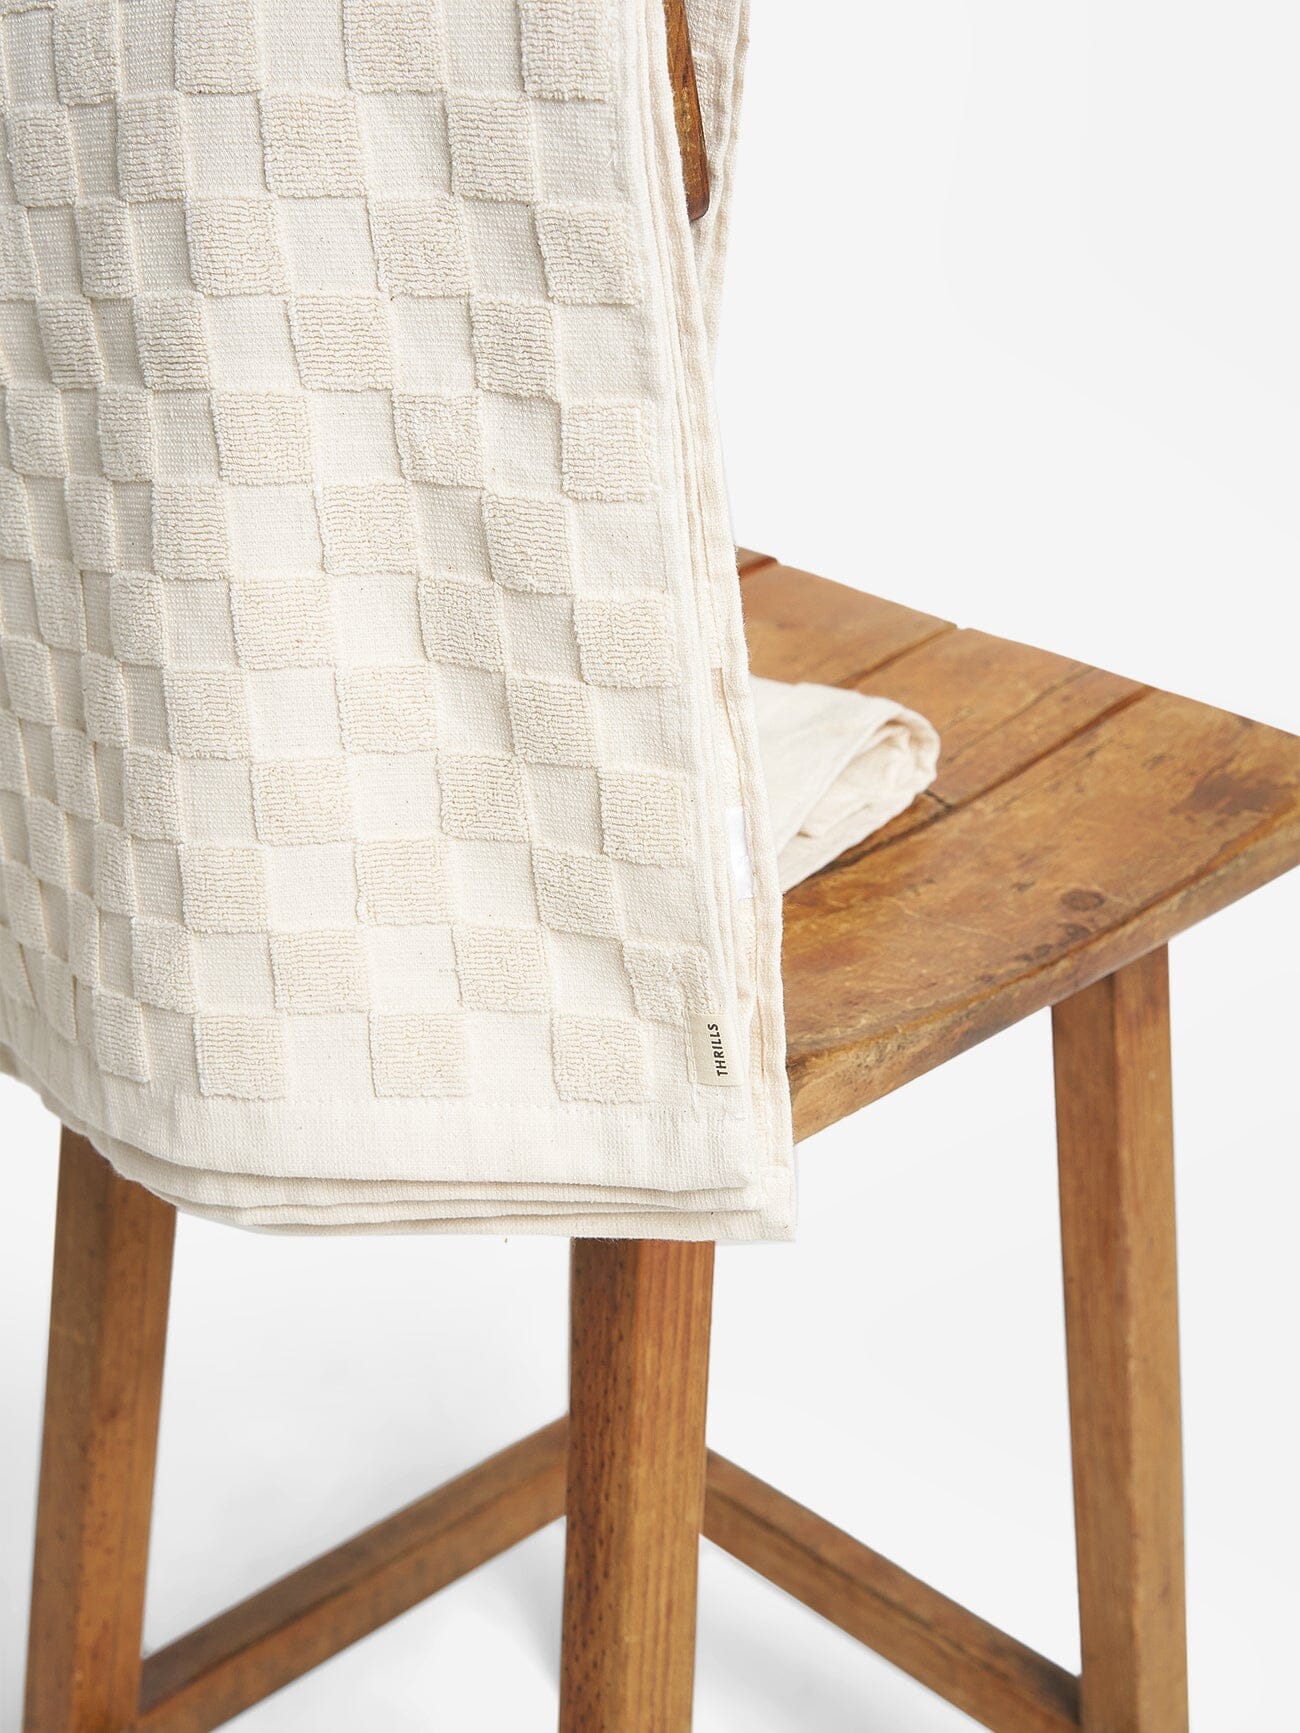 Aalto Terry Towel - Unbleached